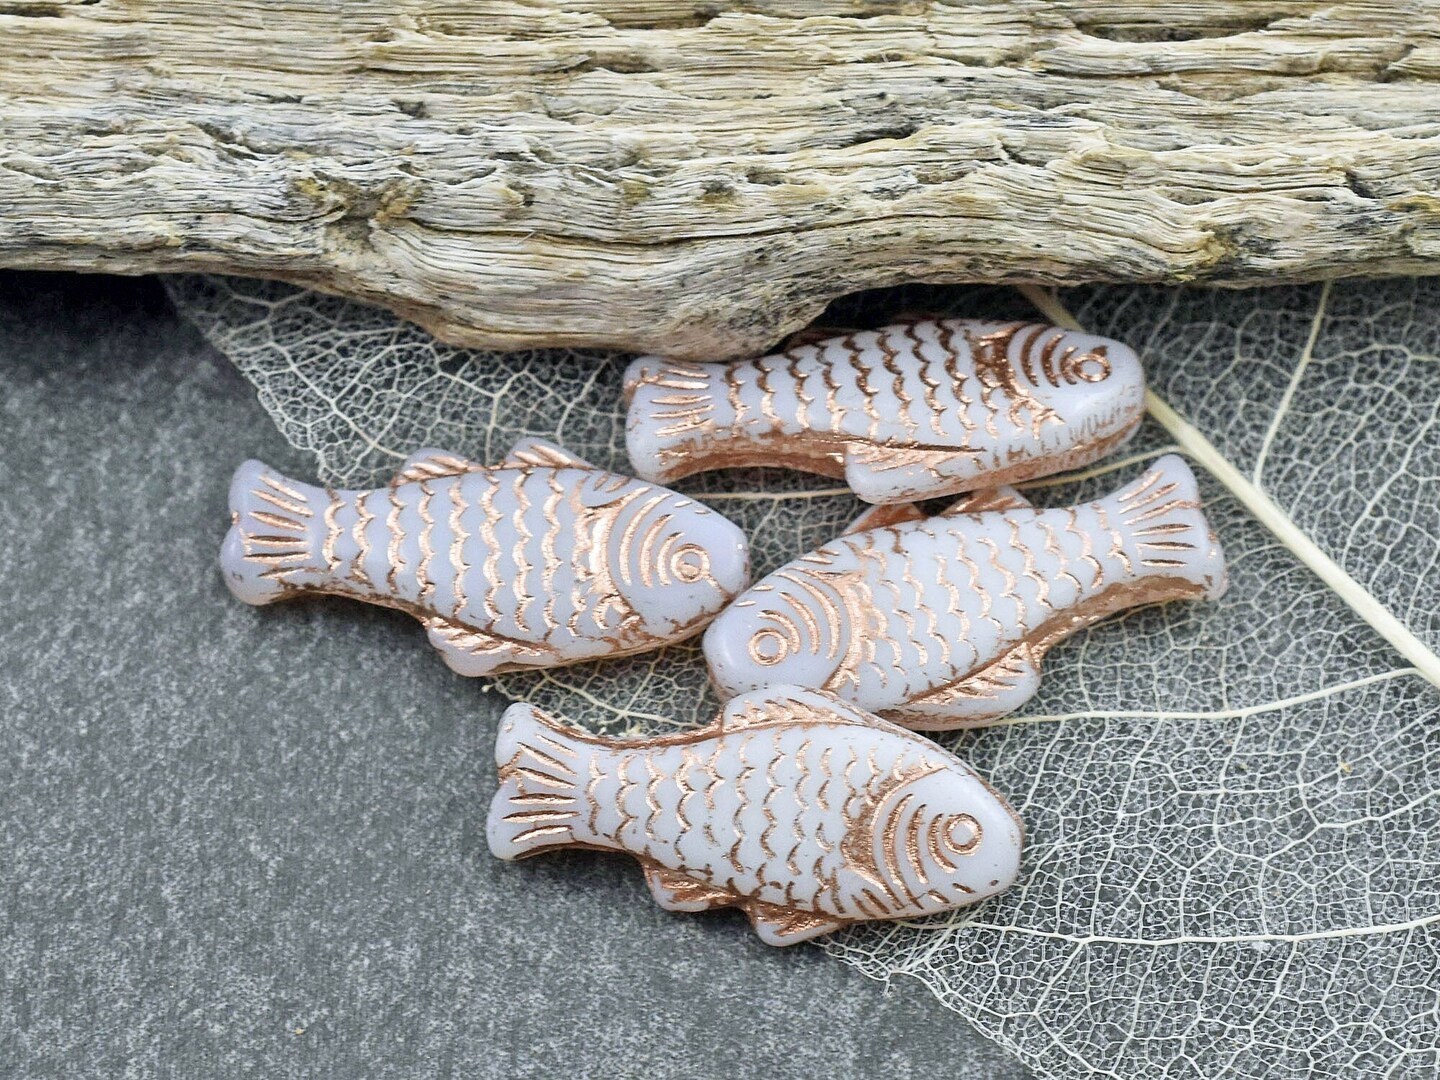 *10* 25x12mm Copper Washed White Opaline Fish Beads